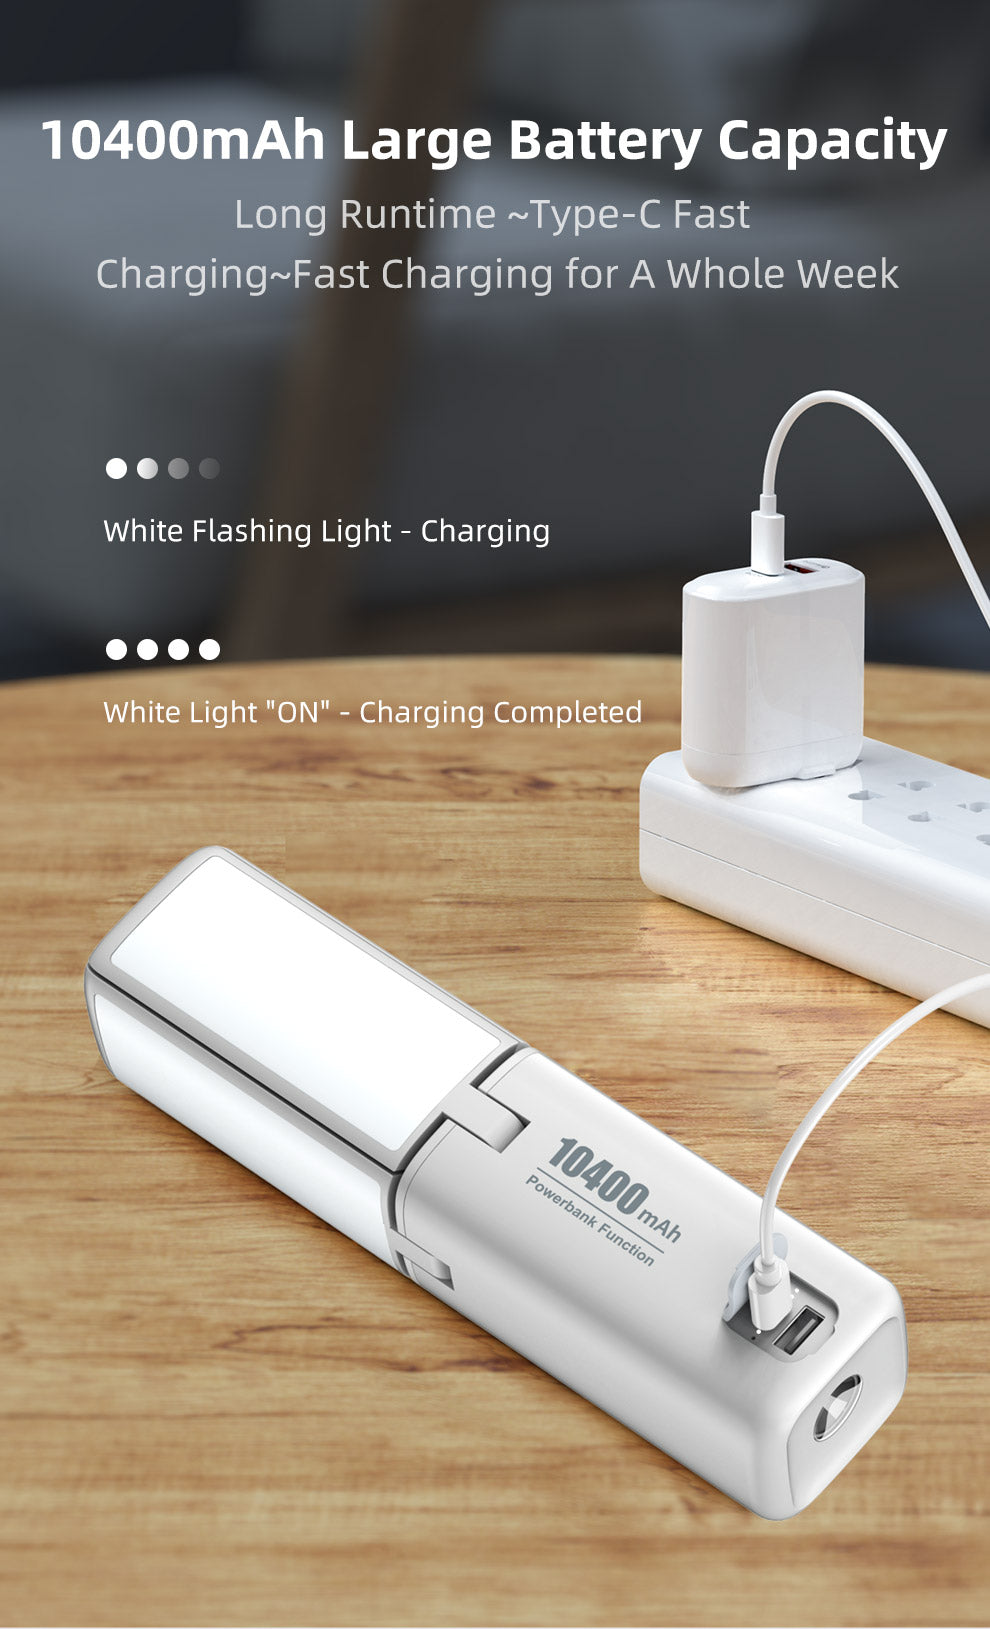 10400mAh Large Battery Capacity			 Long Runtime			 Type-C Fast Charging			 Fast Charging for a whole week			 White Flashing Light - Charging			 White Light "ON" - Charging Complete